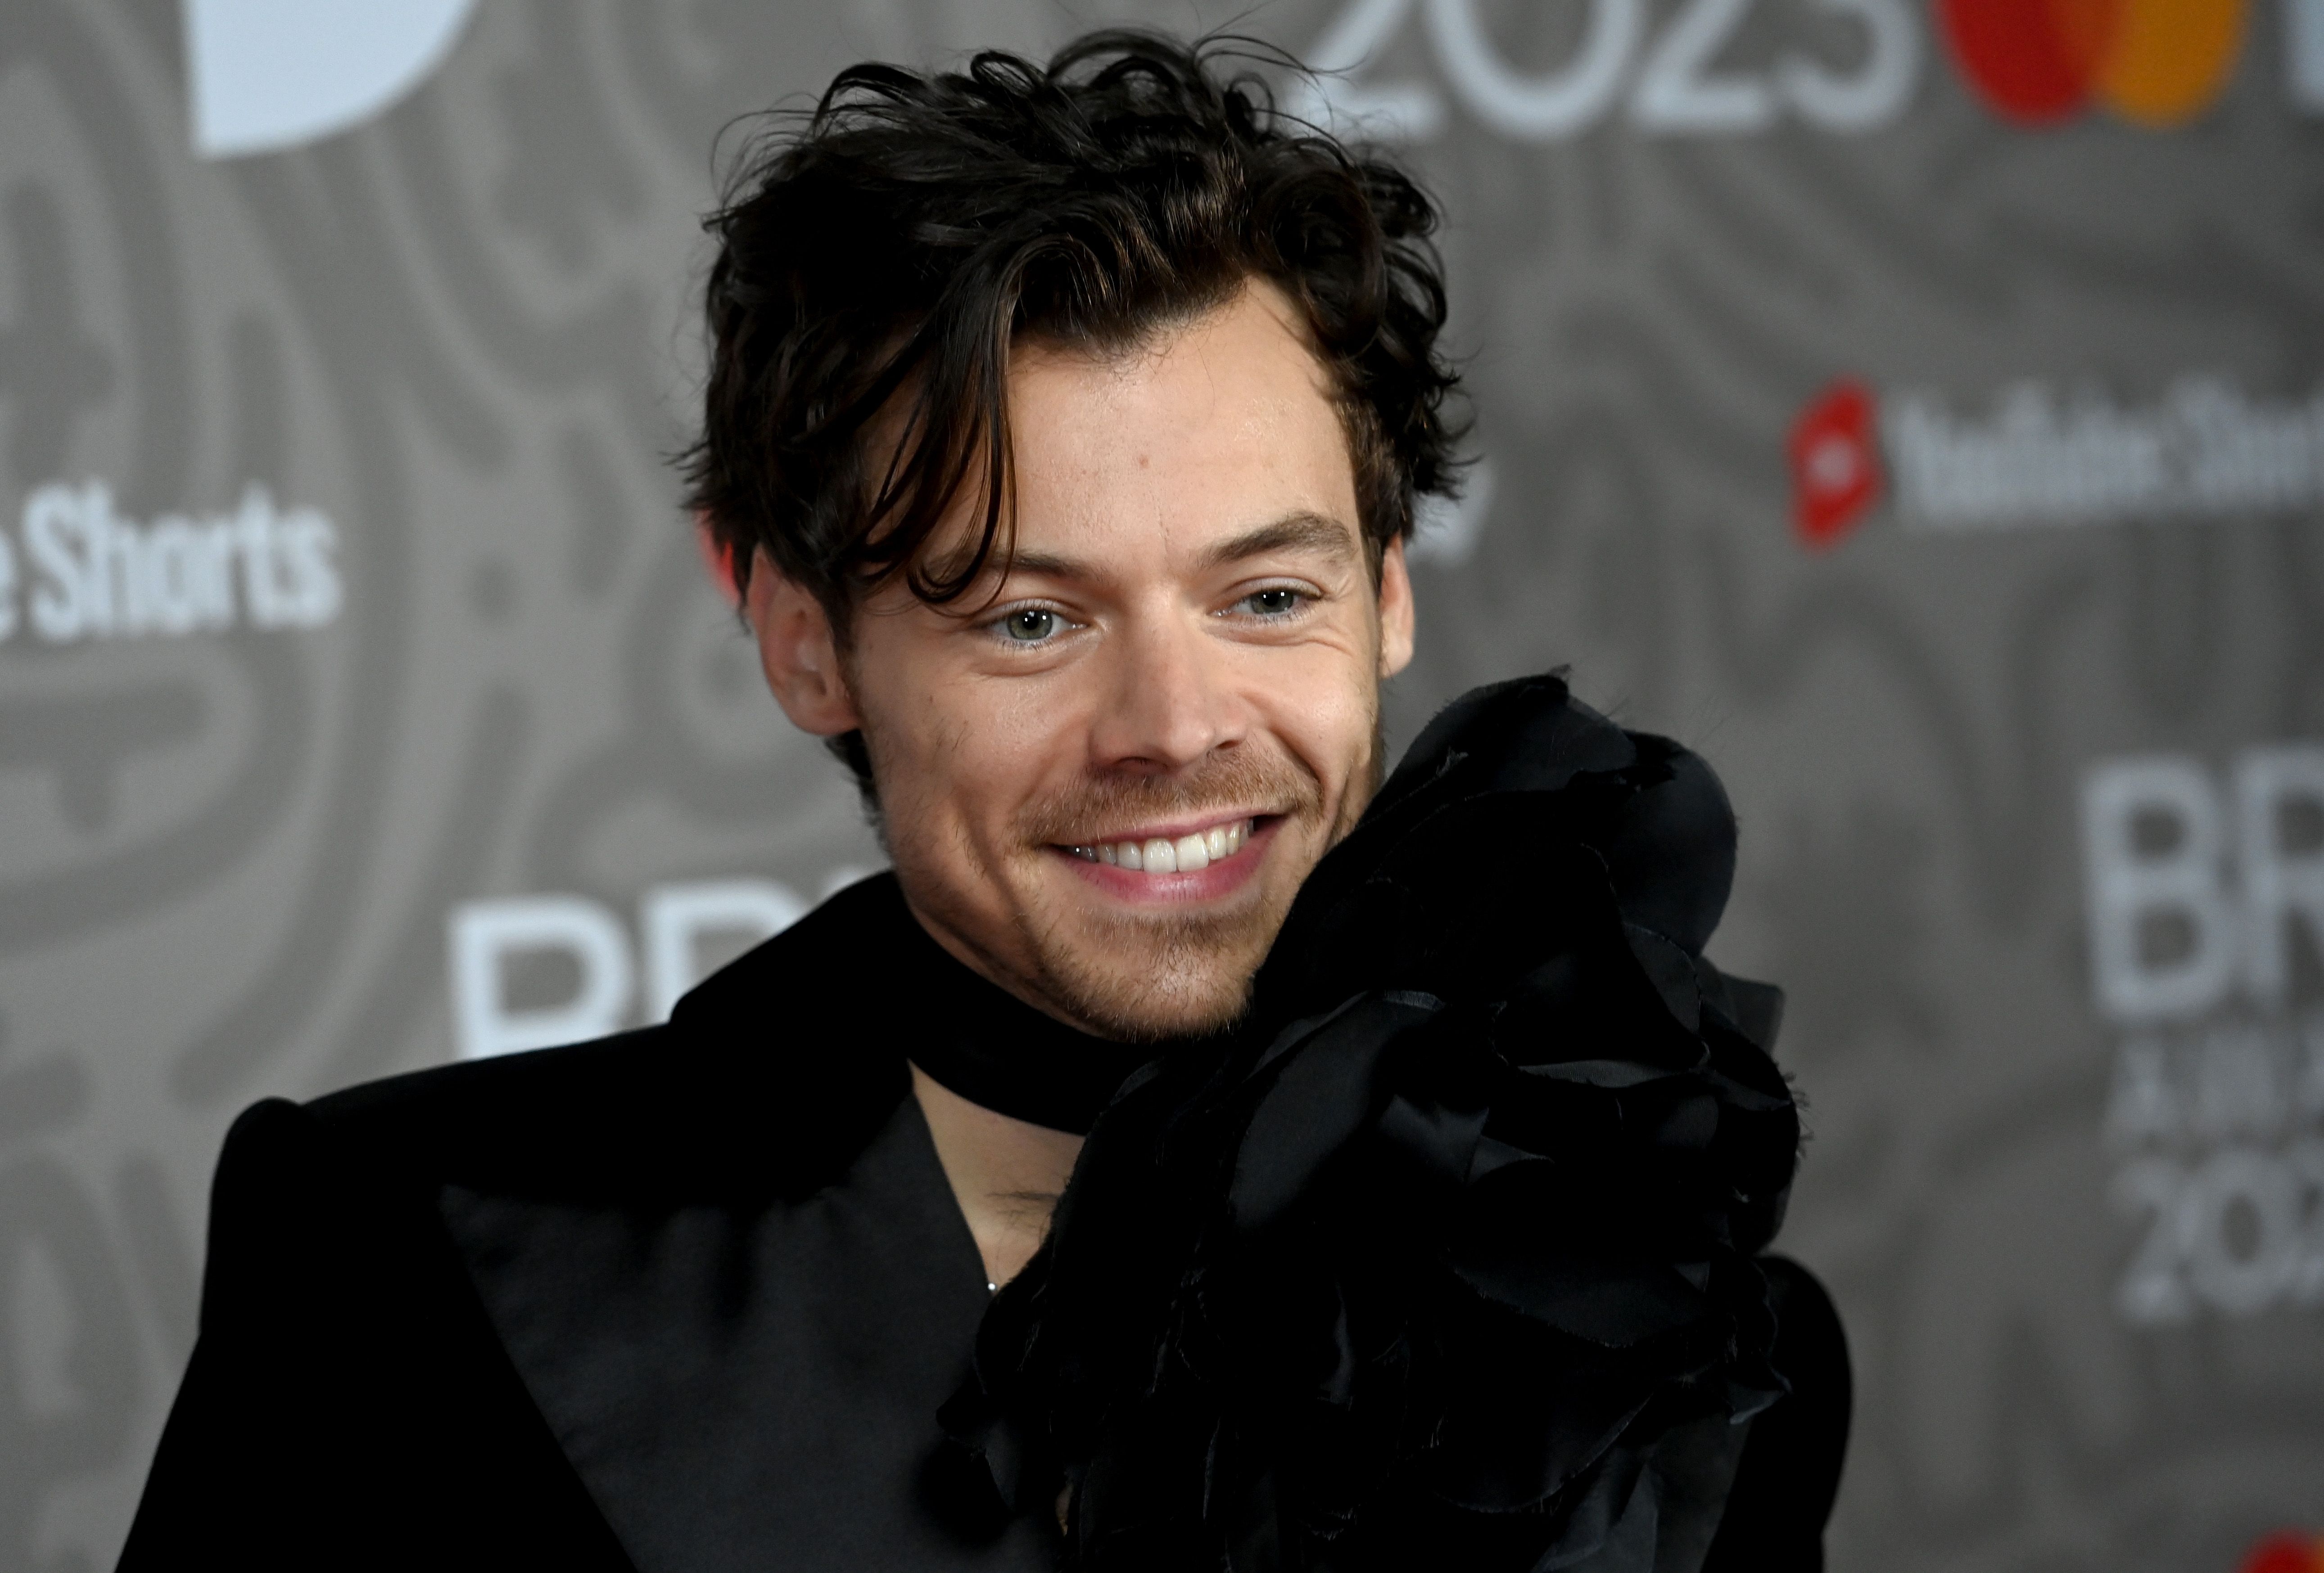 https://hips.hearstapps.com/hmg-prod/images/harry-styles-attends-the-brit-awards-2023-at-the-o2-arena-news-photo-1678121269.jpg